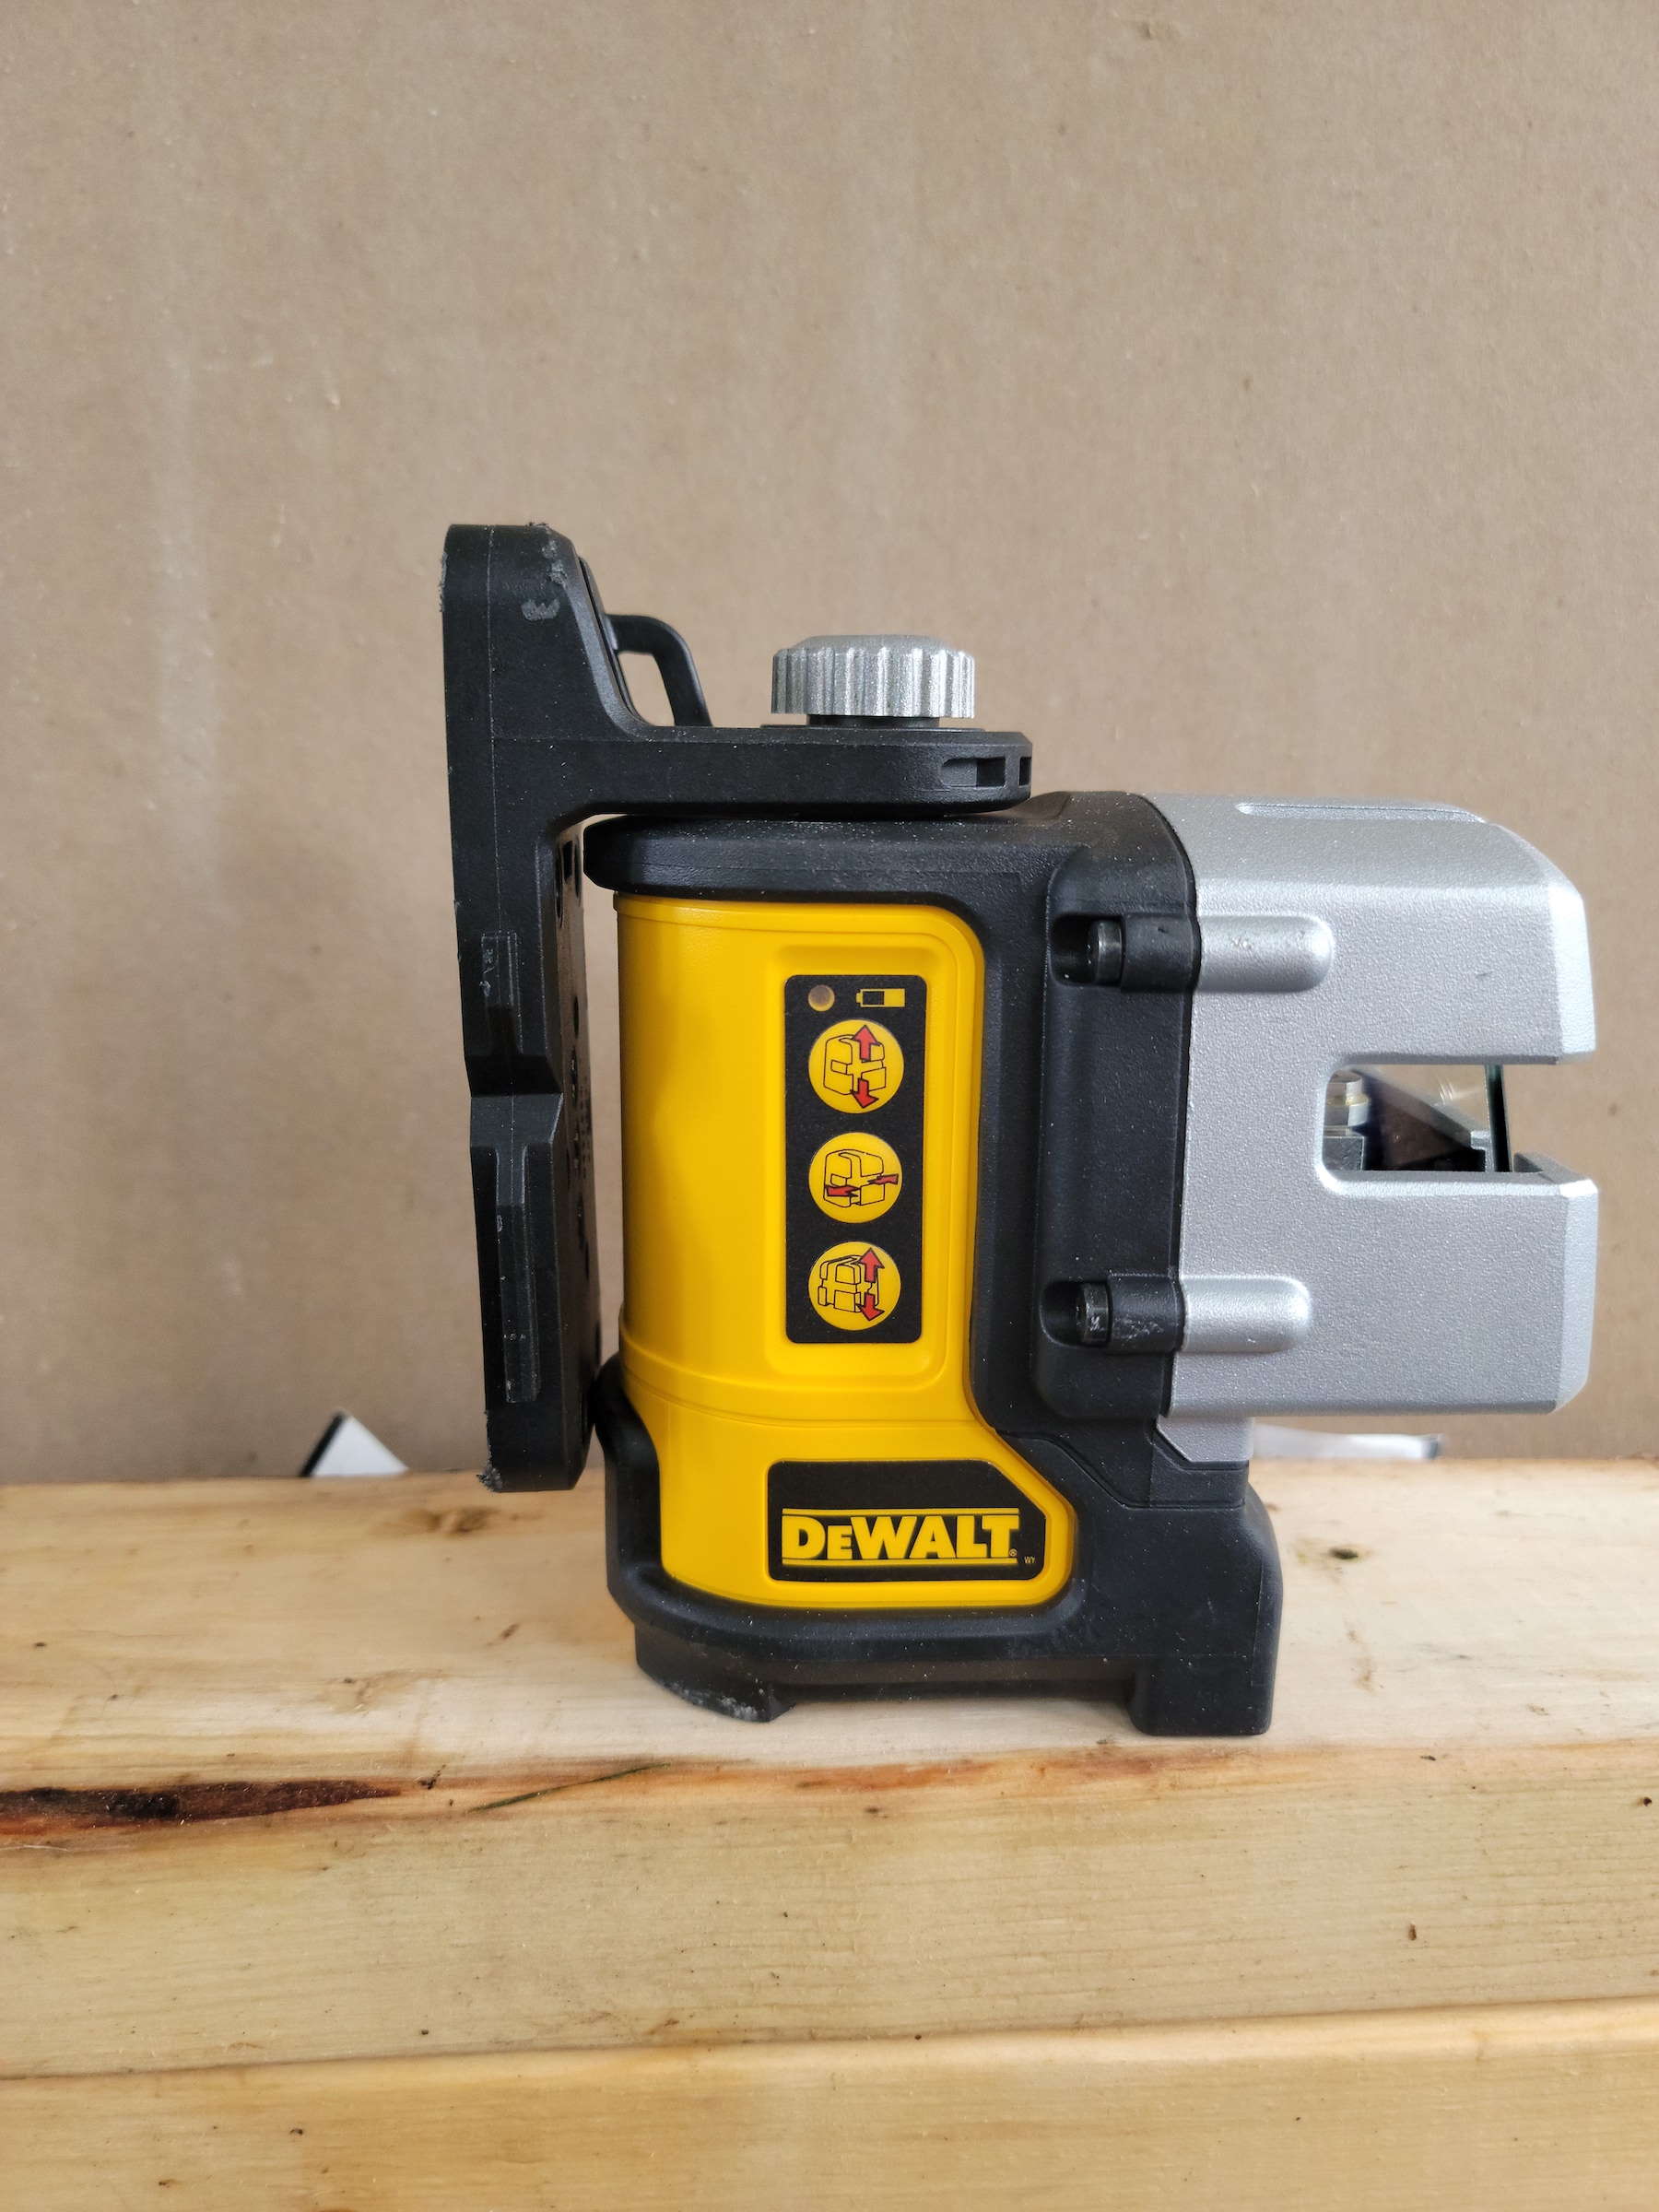 The Best Power Tools and DIY Products Option DeWalt 3-Beam Line Laser Level